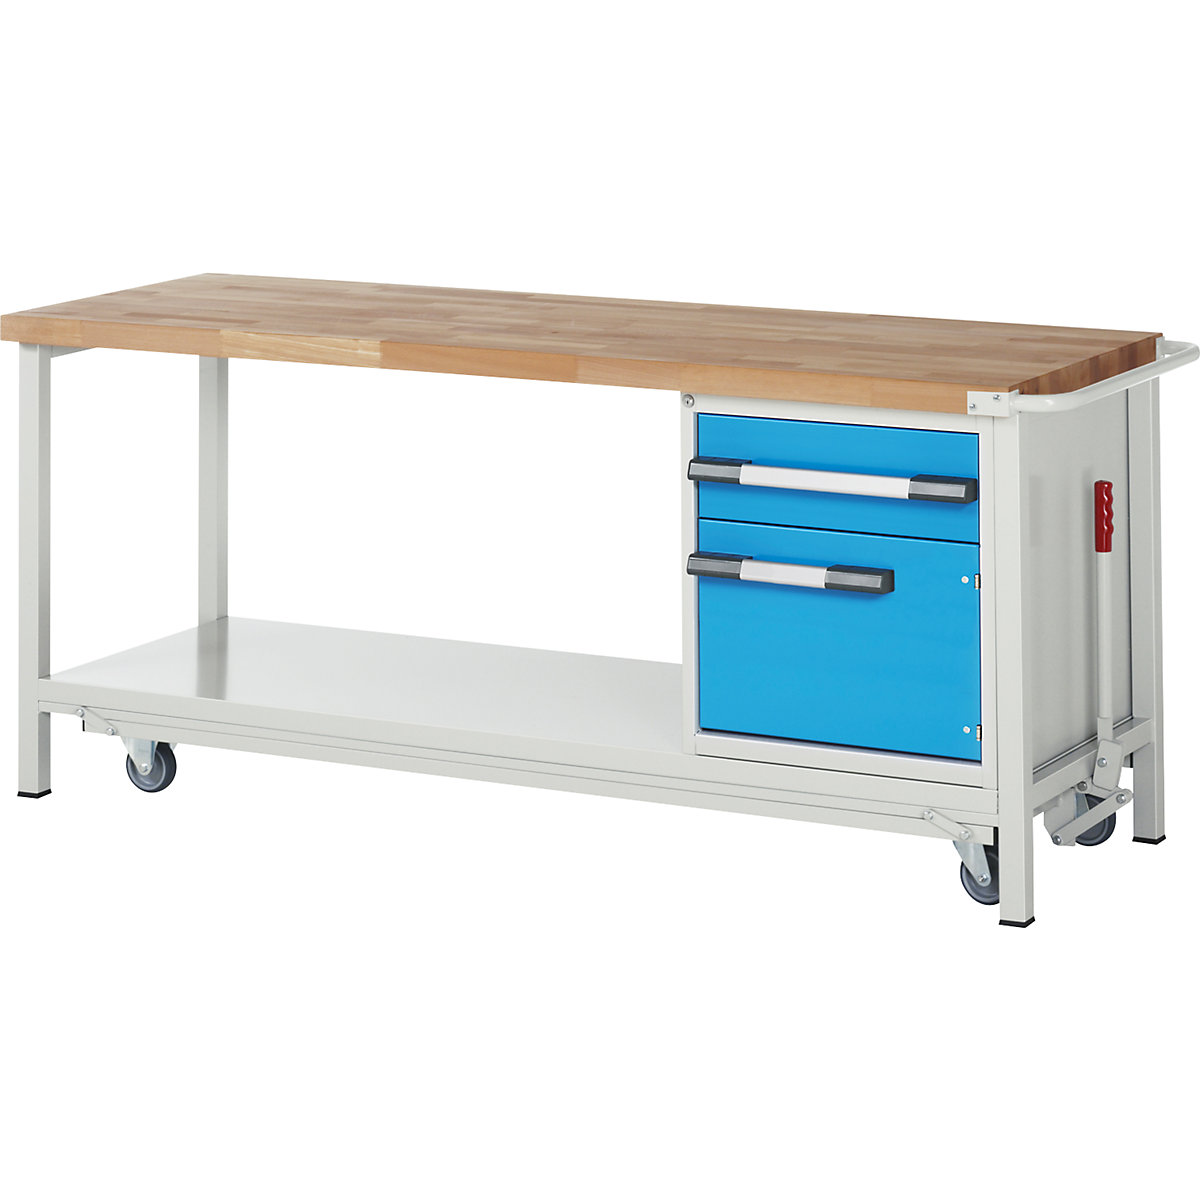 Mobile and lowerable workbench, Series 8 frame construction – eurokraft pro, 1 drawer, 1 door, storage shelf, WxD 2000 x 700 mm-4